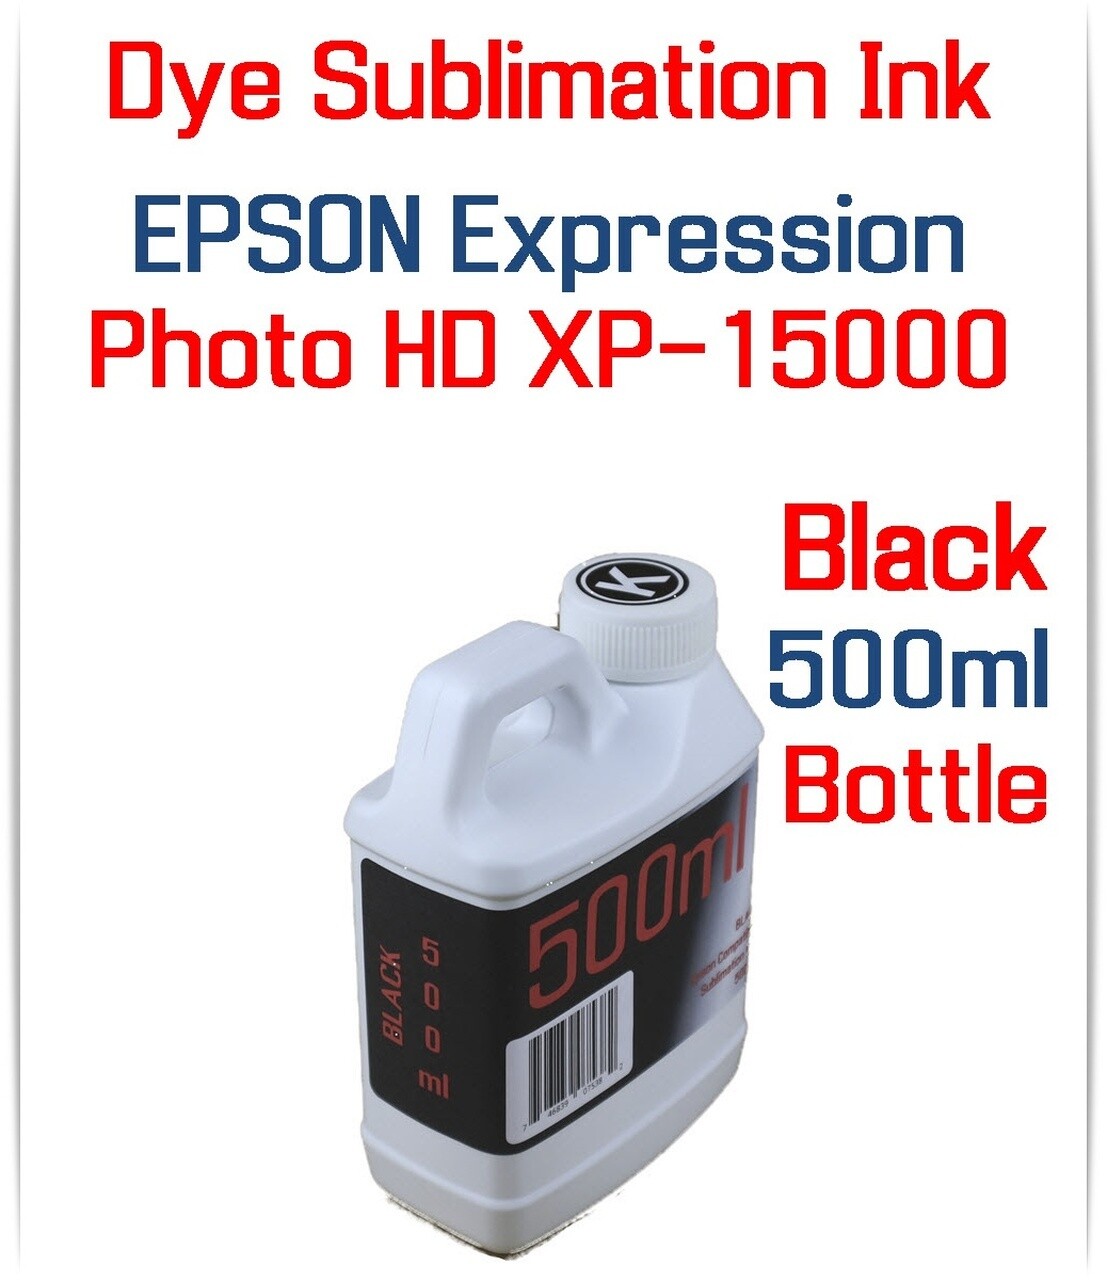 Black Dye Sublimation Ink 500ml for Epson Expression Photo HD XP-15000 printer